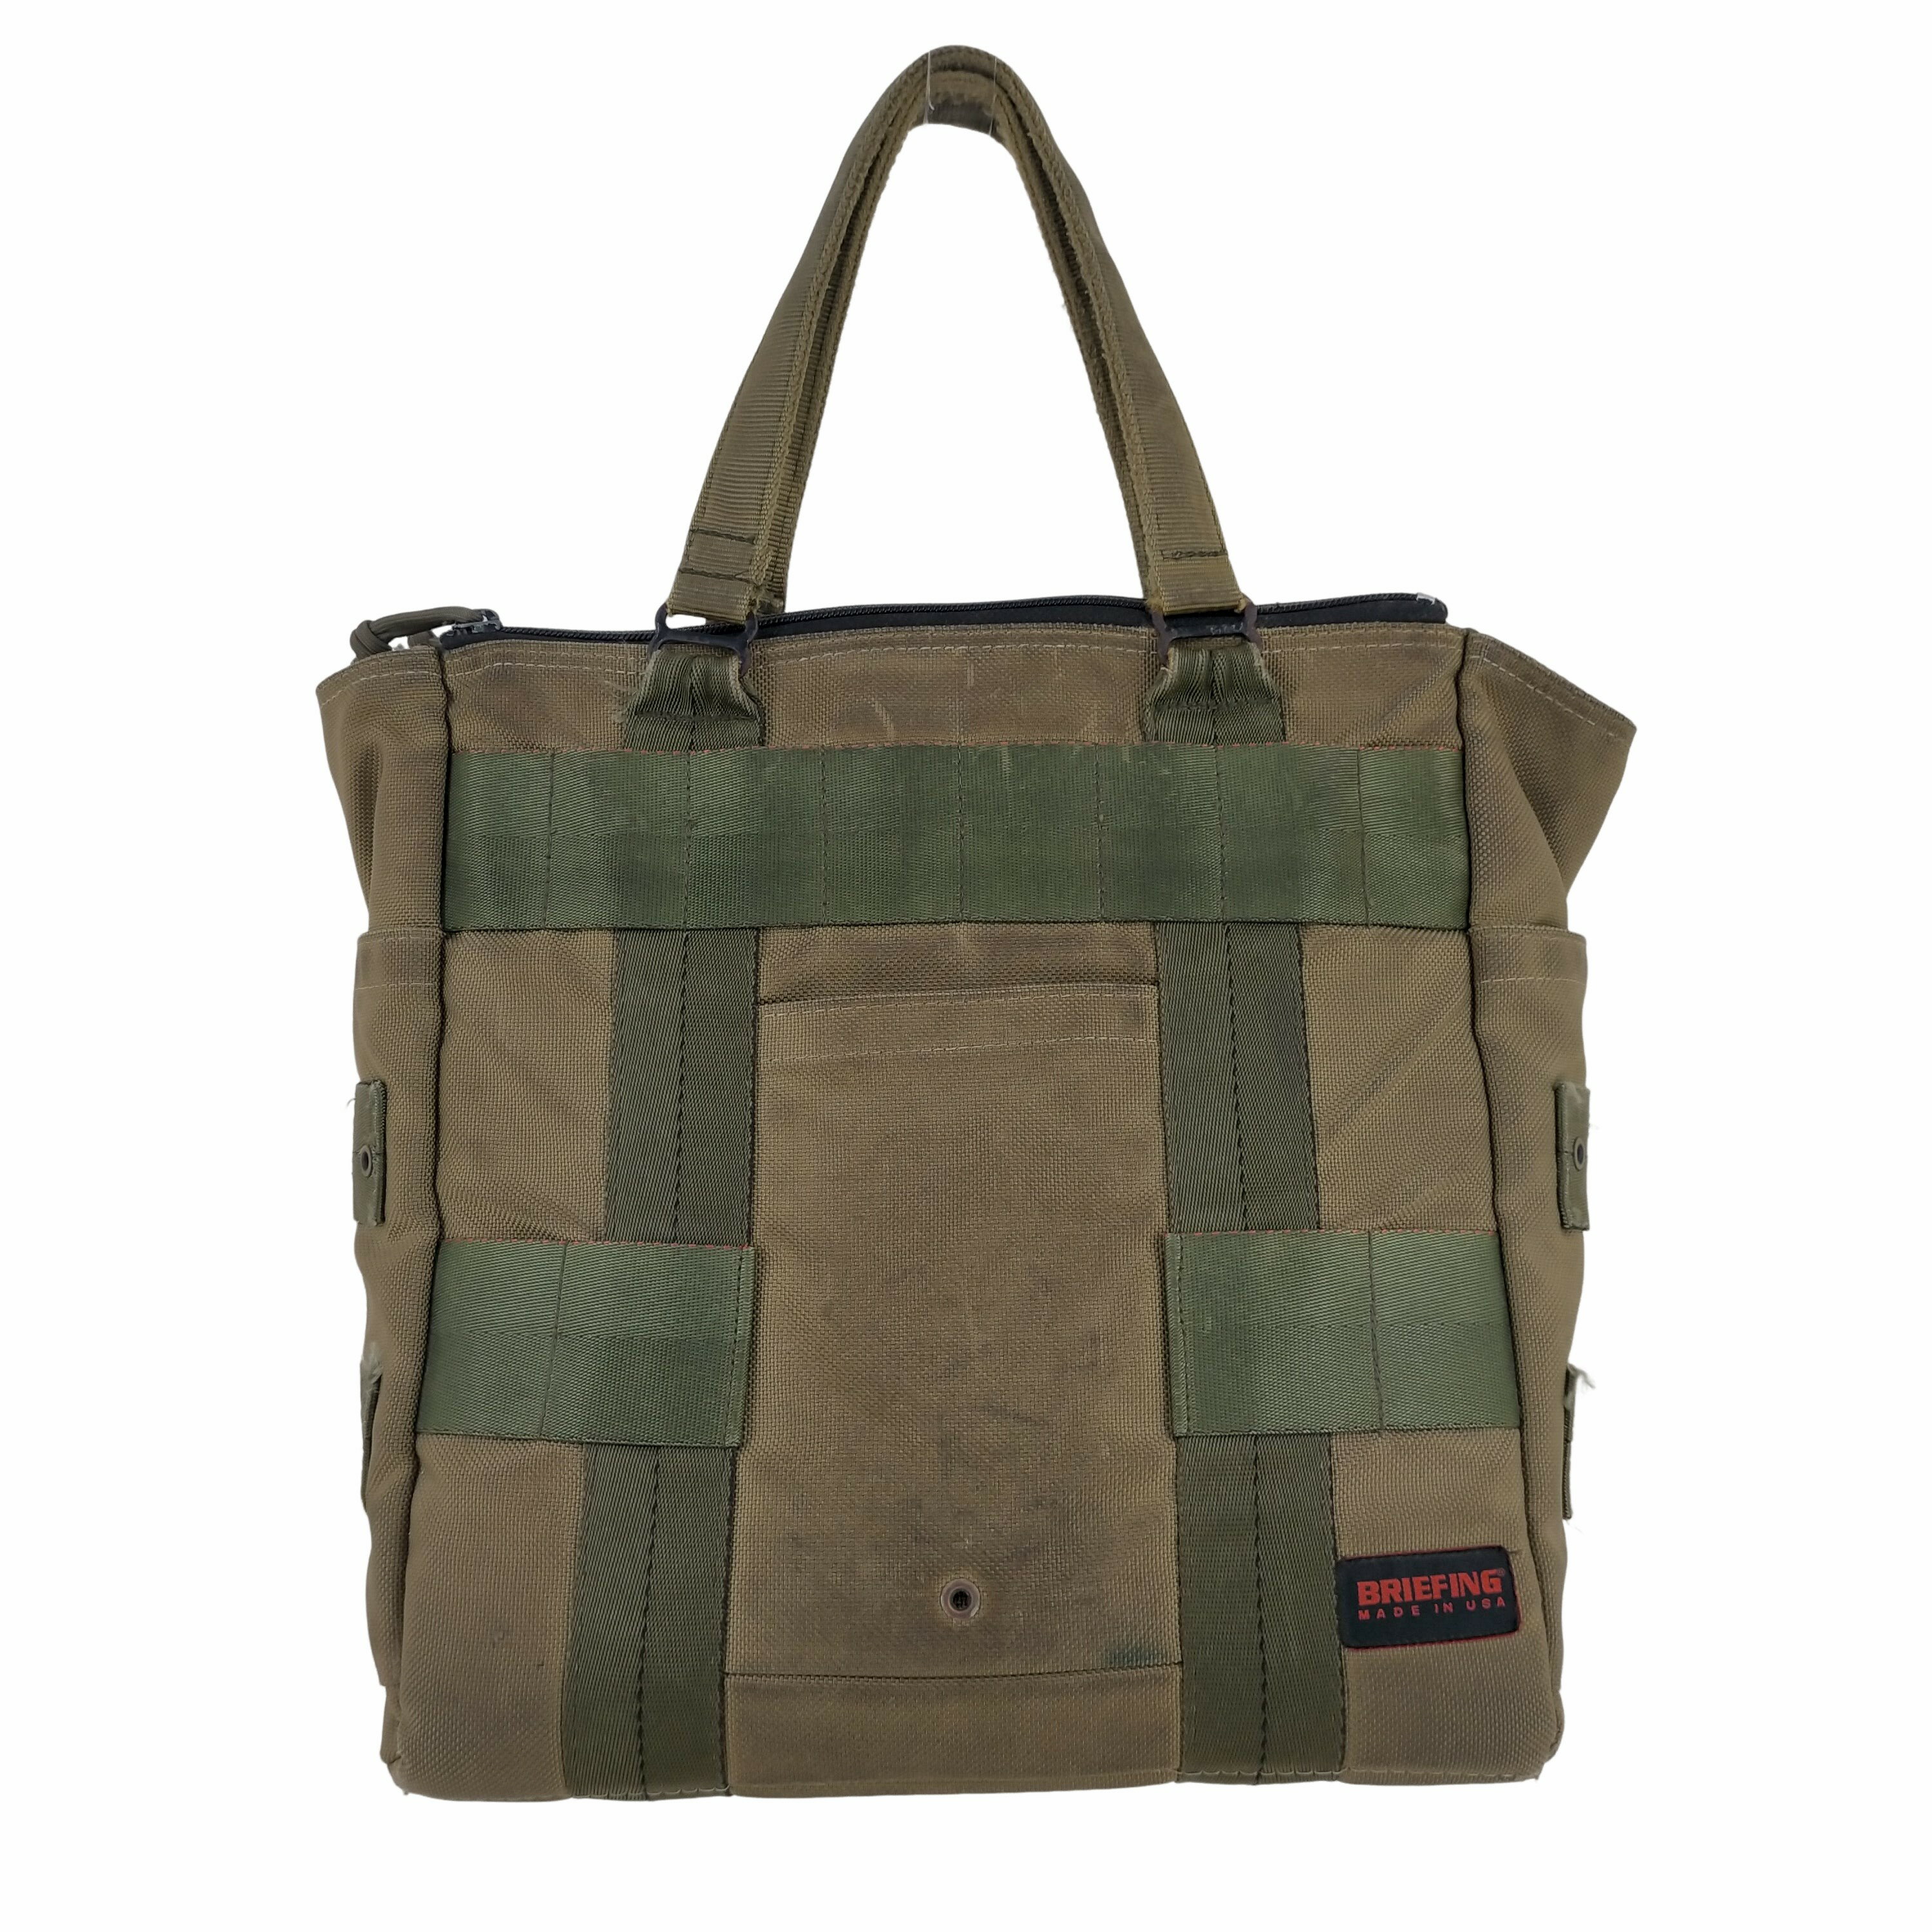 yÁzu[tBO BRIEFING USA PROTECTION TOTE Y \L